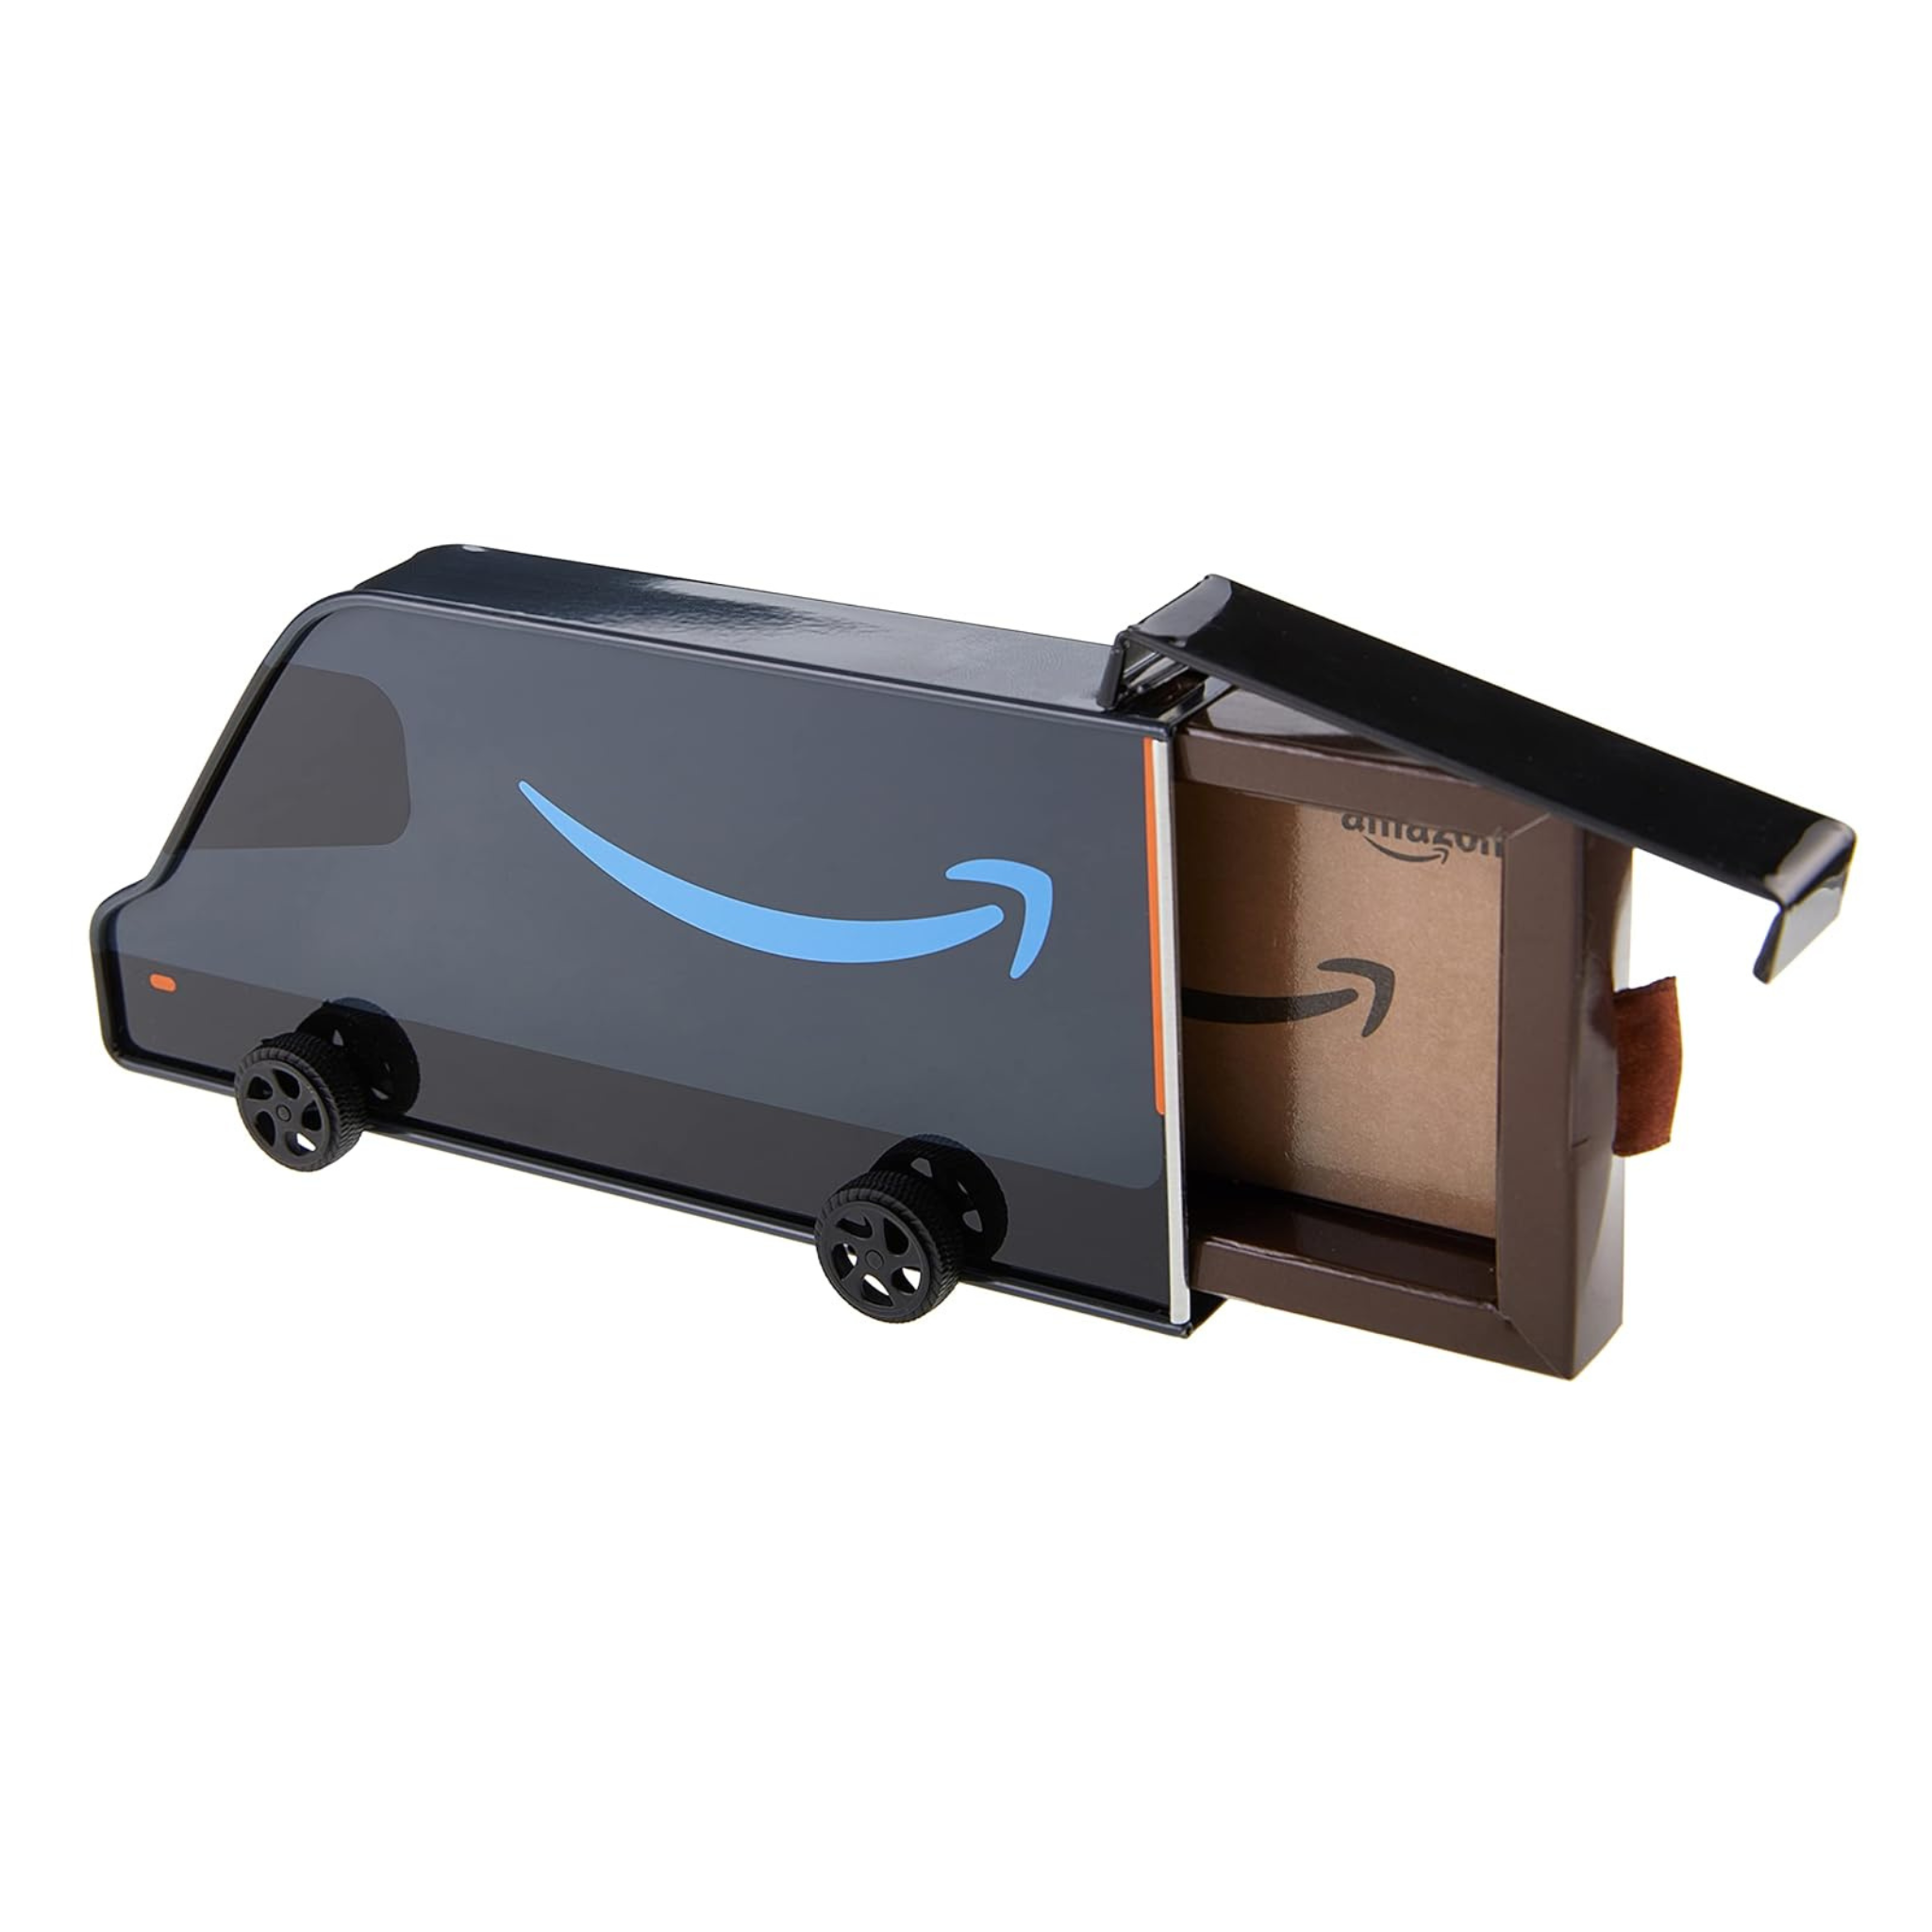 Purchase a $50 Amazon Gift Card and Receive Limited Edition Prime Van Tin